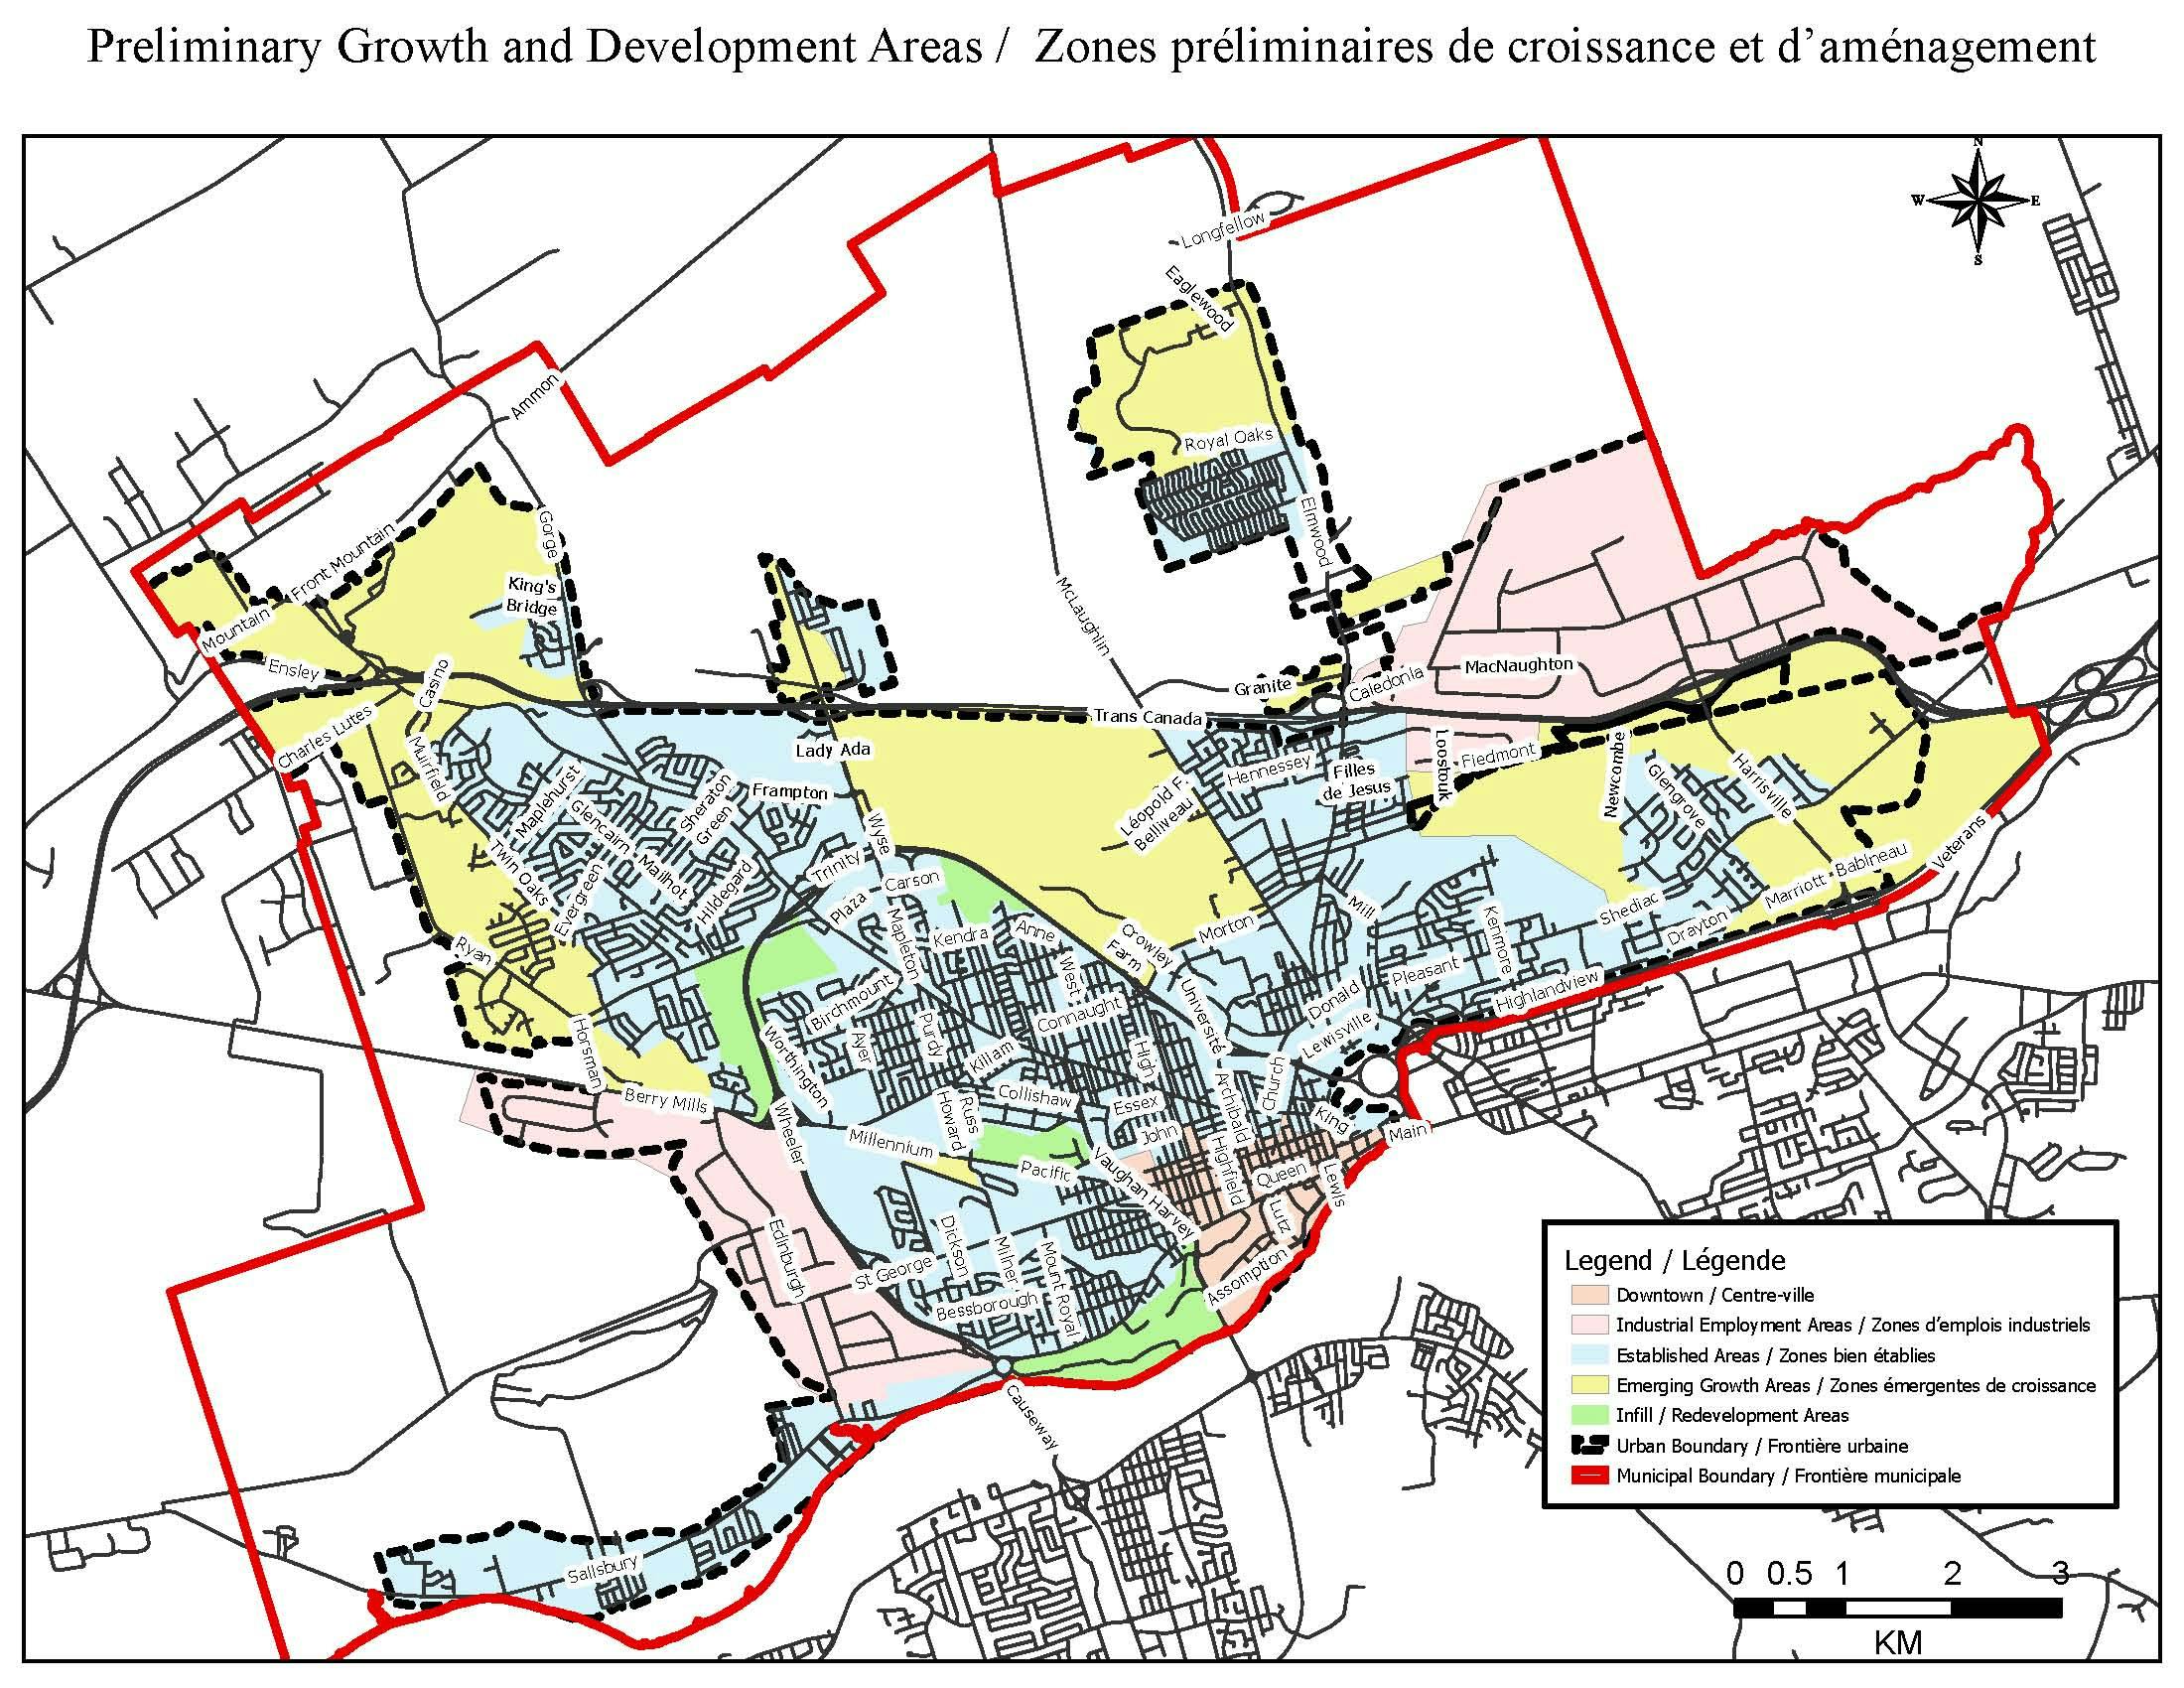 Preliminary Growth and Development Areas Zones